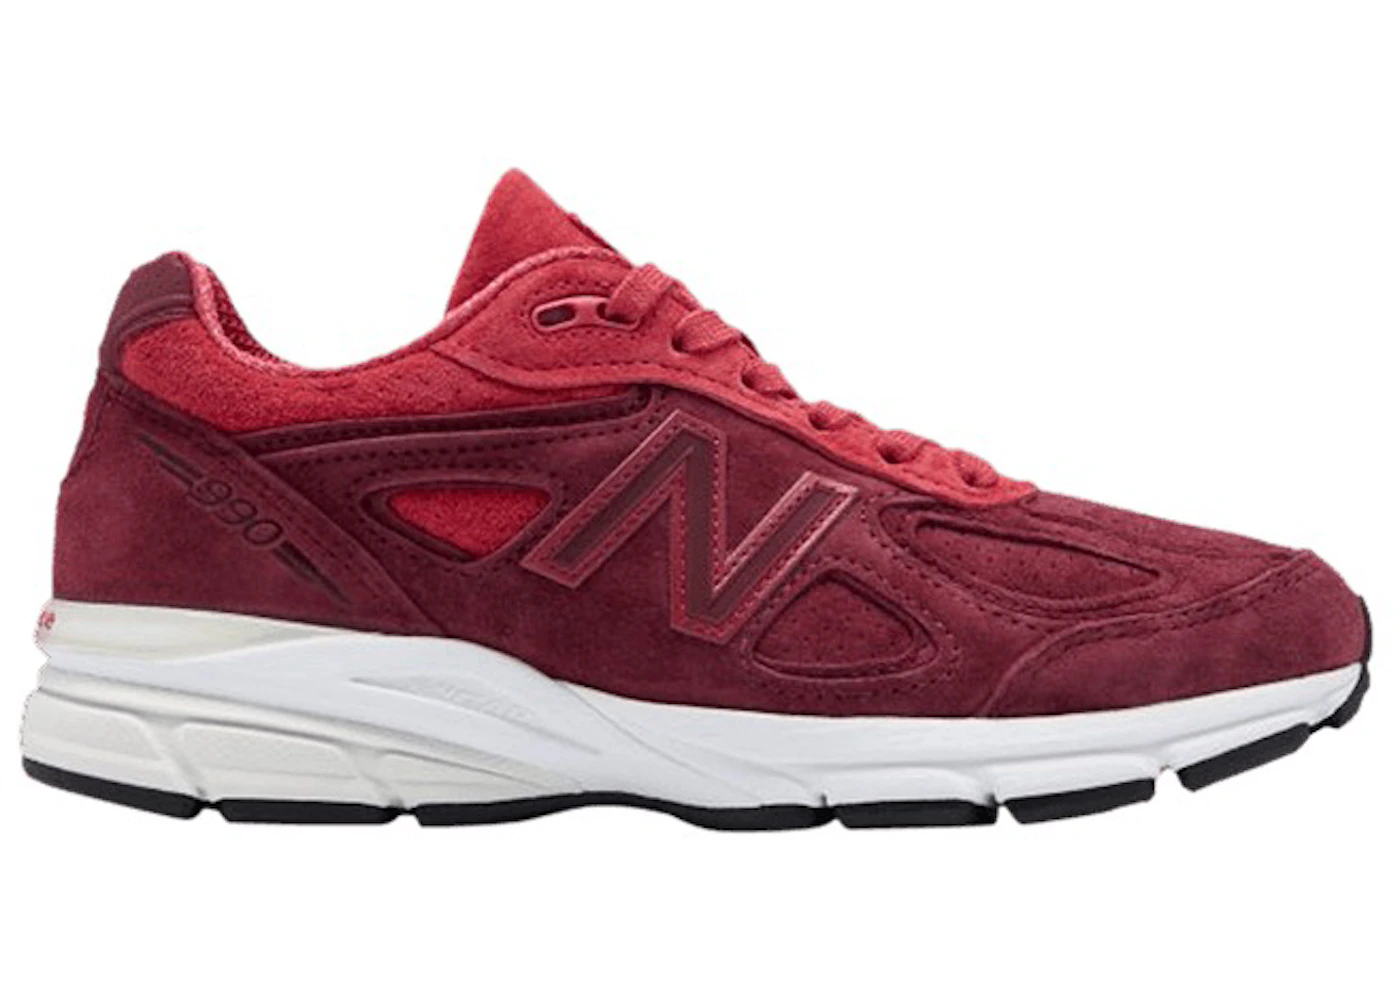 New Balance 990v4 Made in USA Mercury Red (Women's) - W990VT4 - US